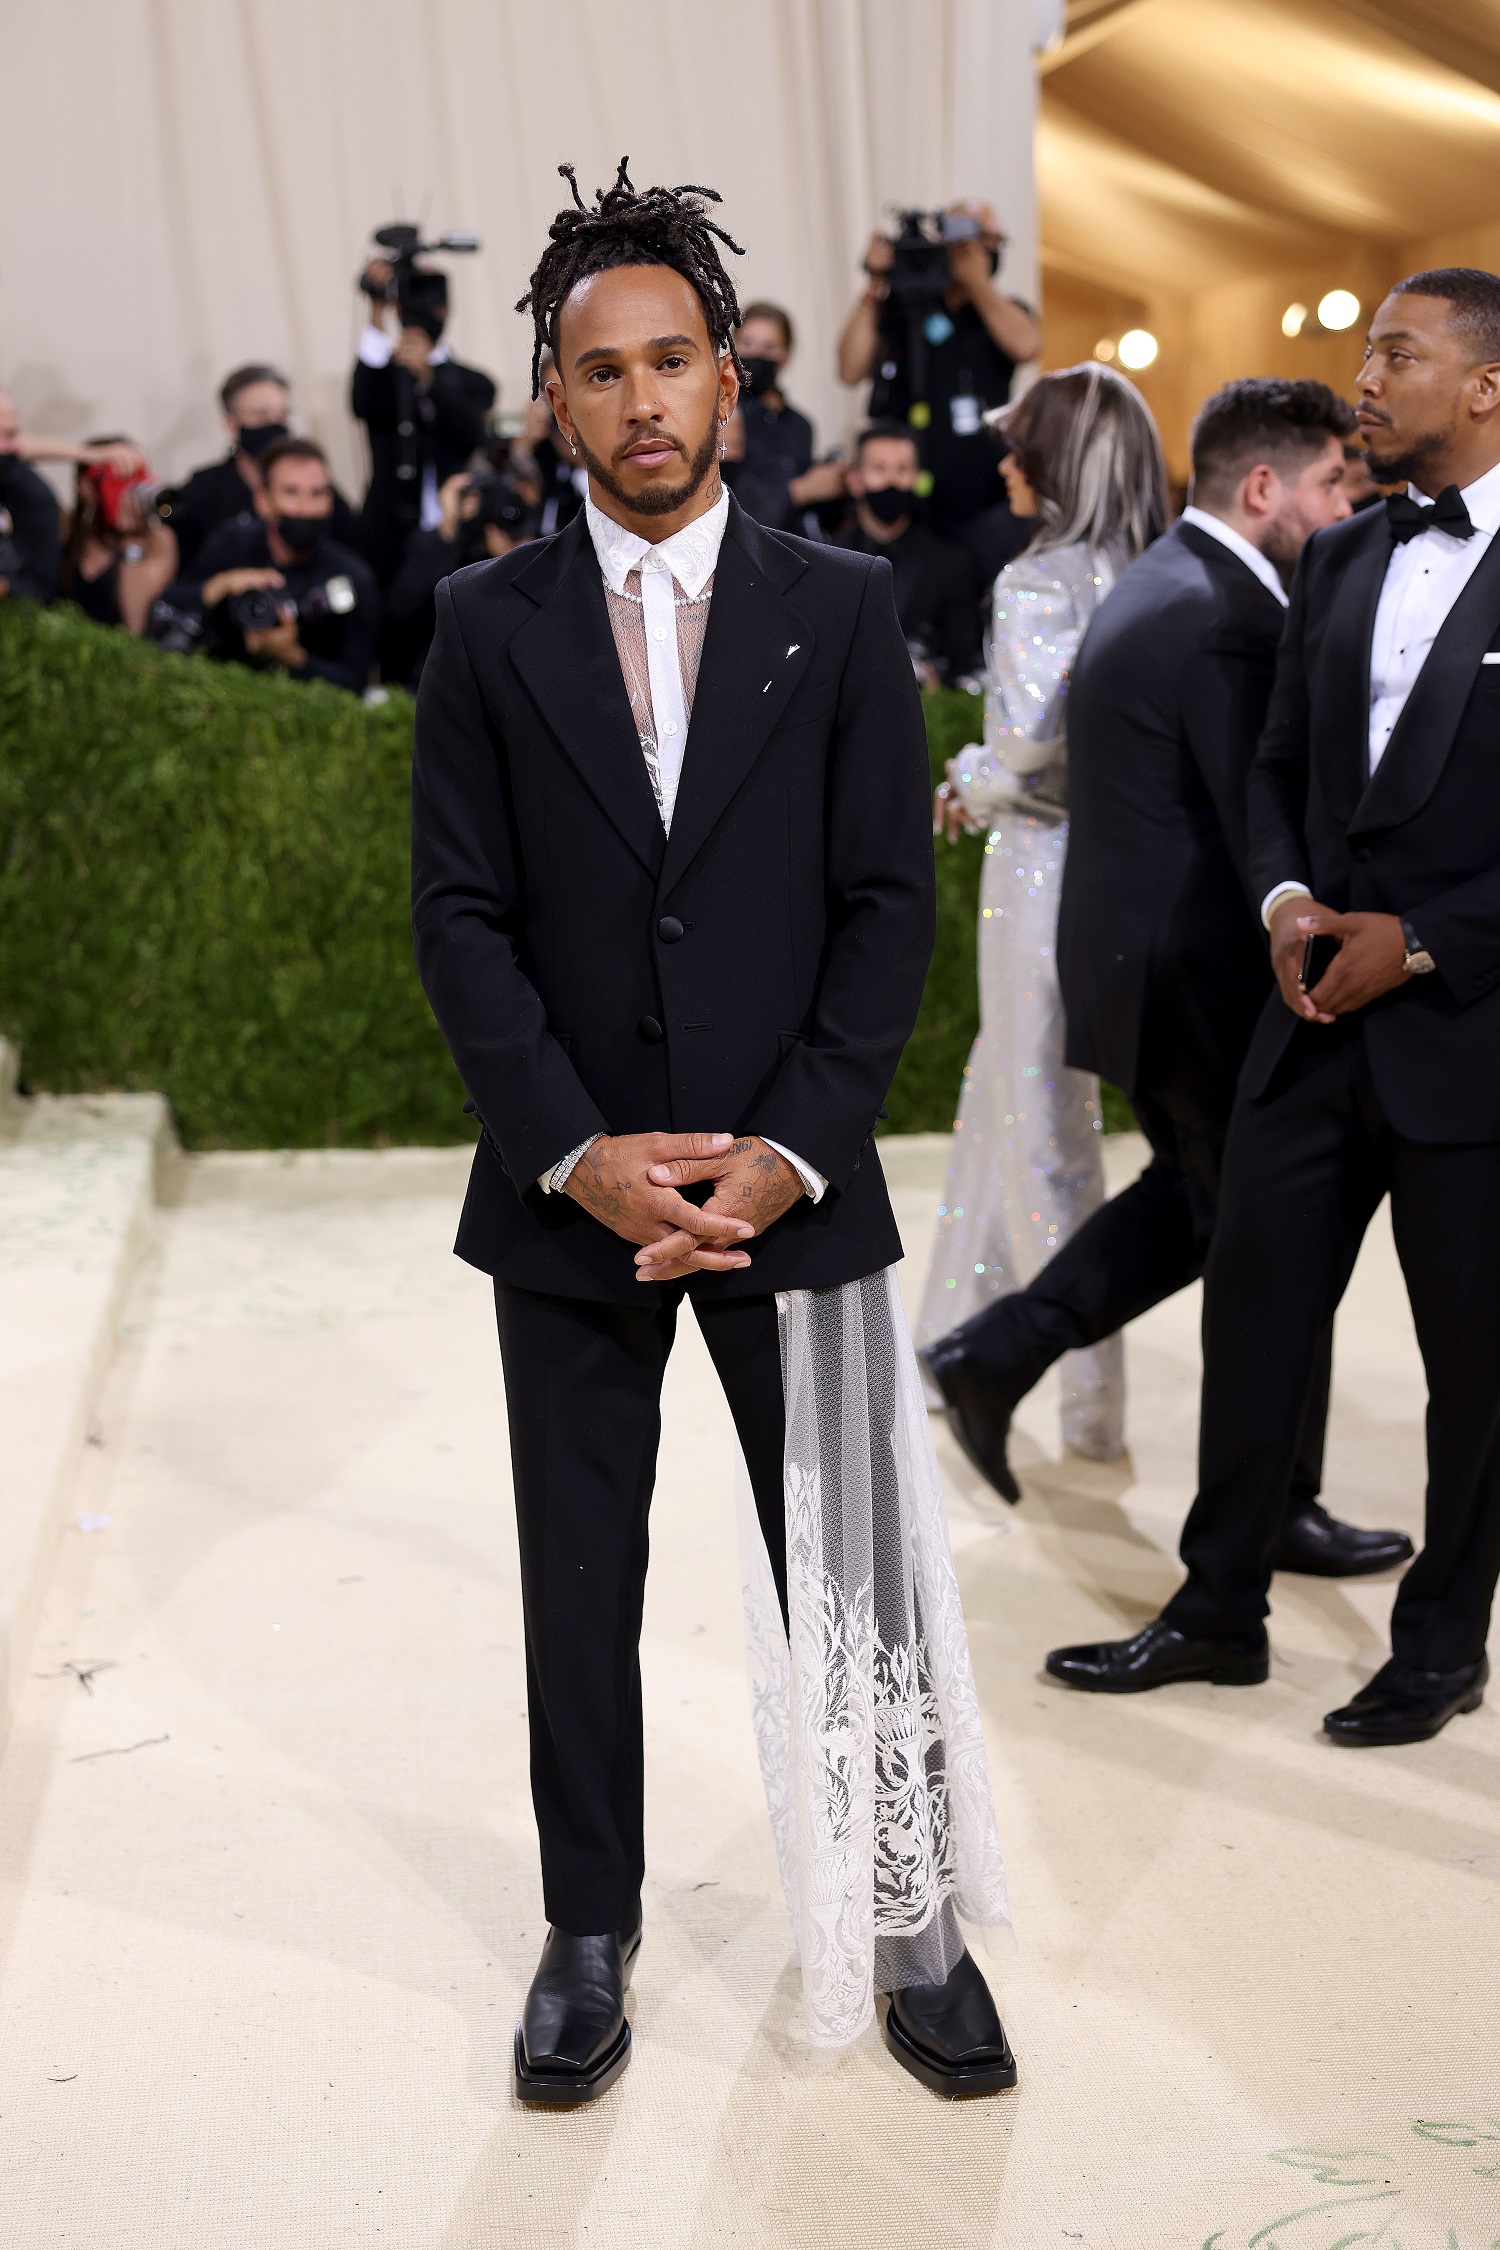 Formula 1 racing star Lewis Hamilton attends The 2021 Met Gala on Sept. 13, 2021, in New York City. | John Shearer/WireImage via Getty Images.